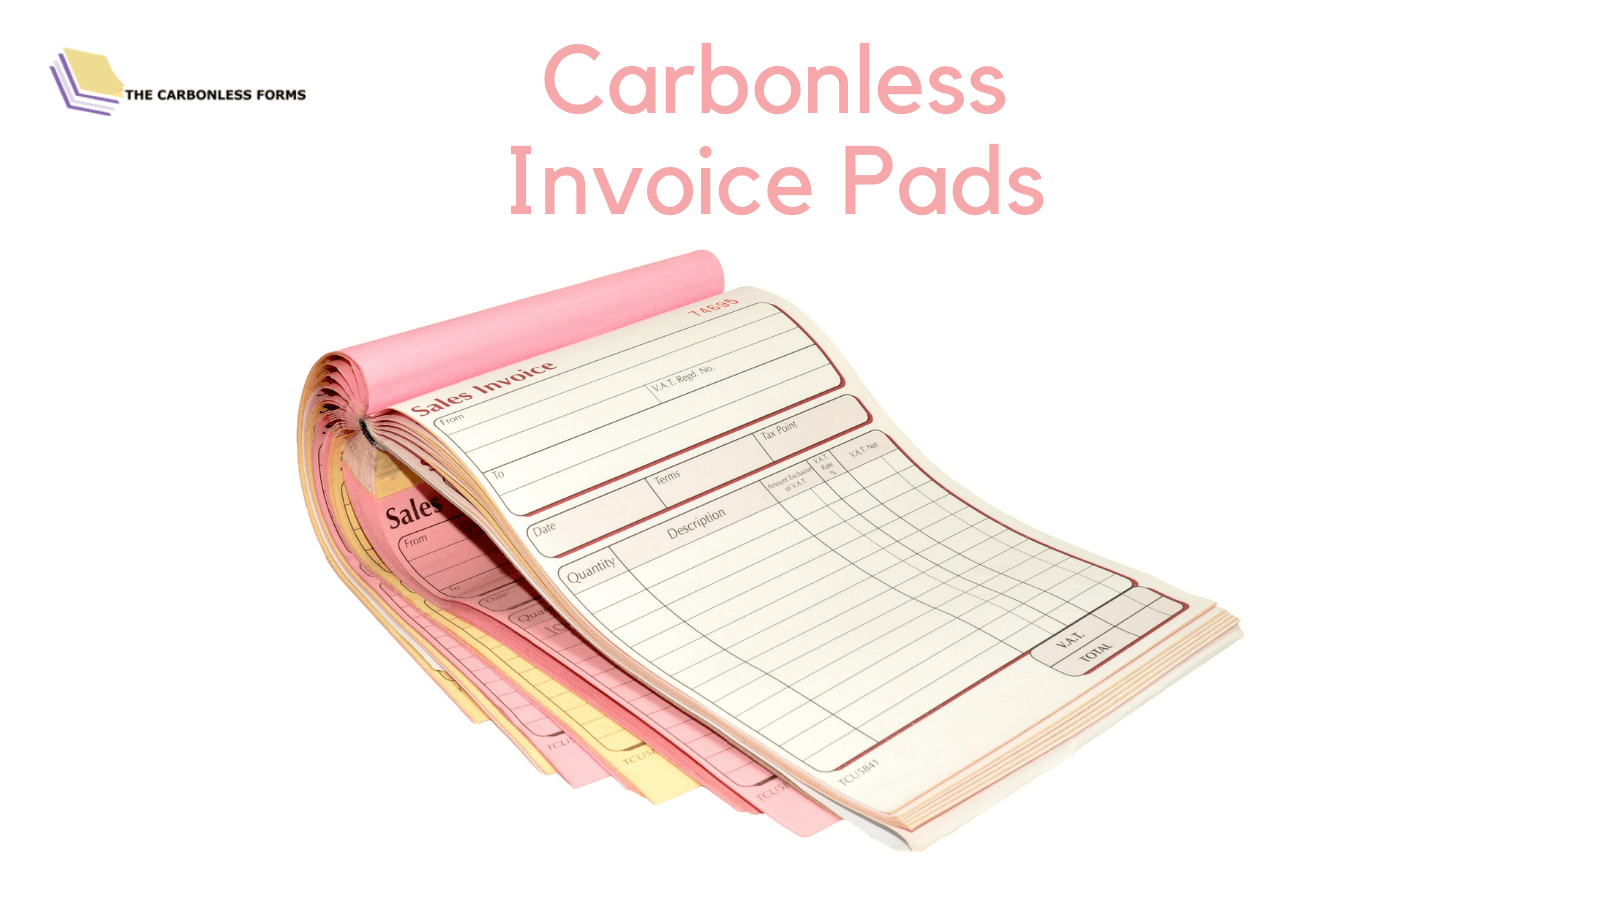 Carbonless Invoice Pads